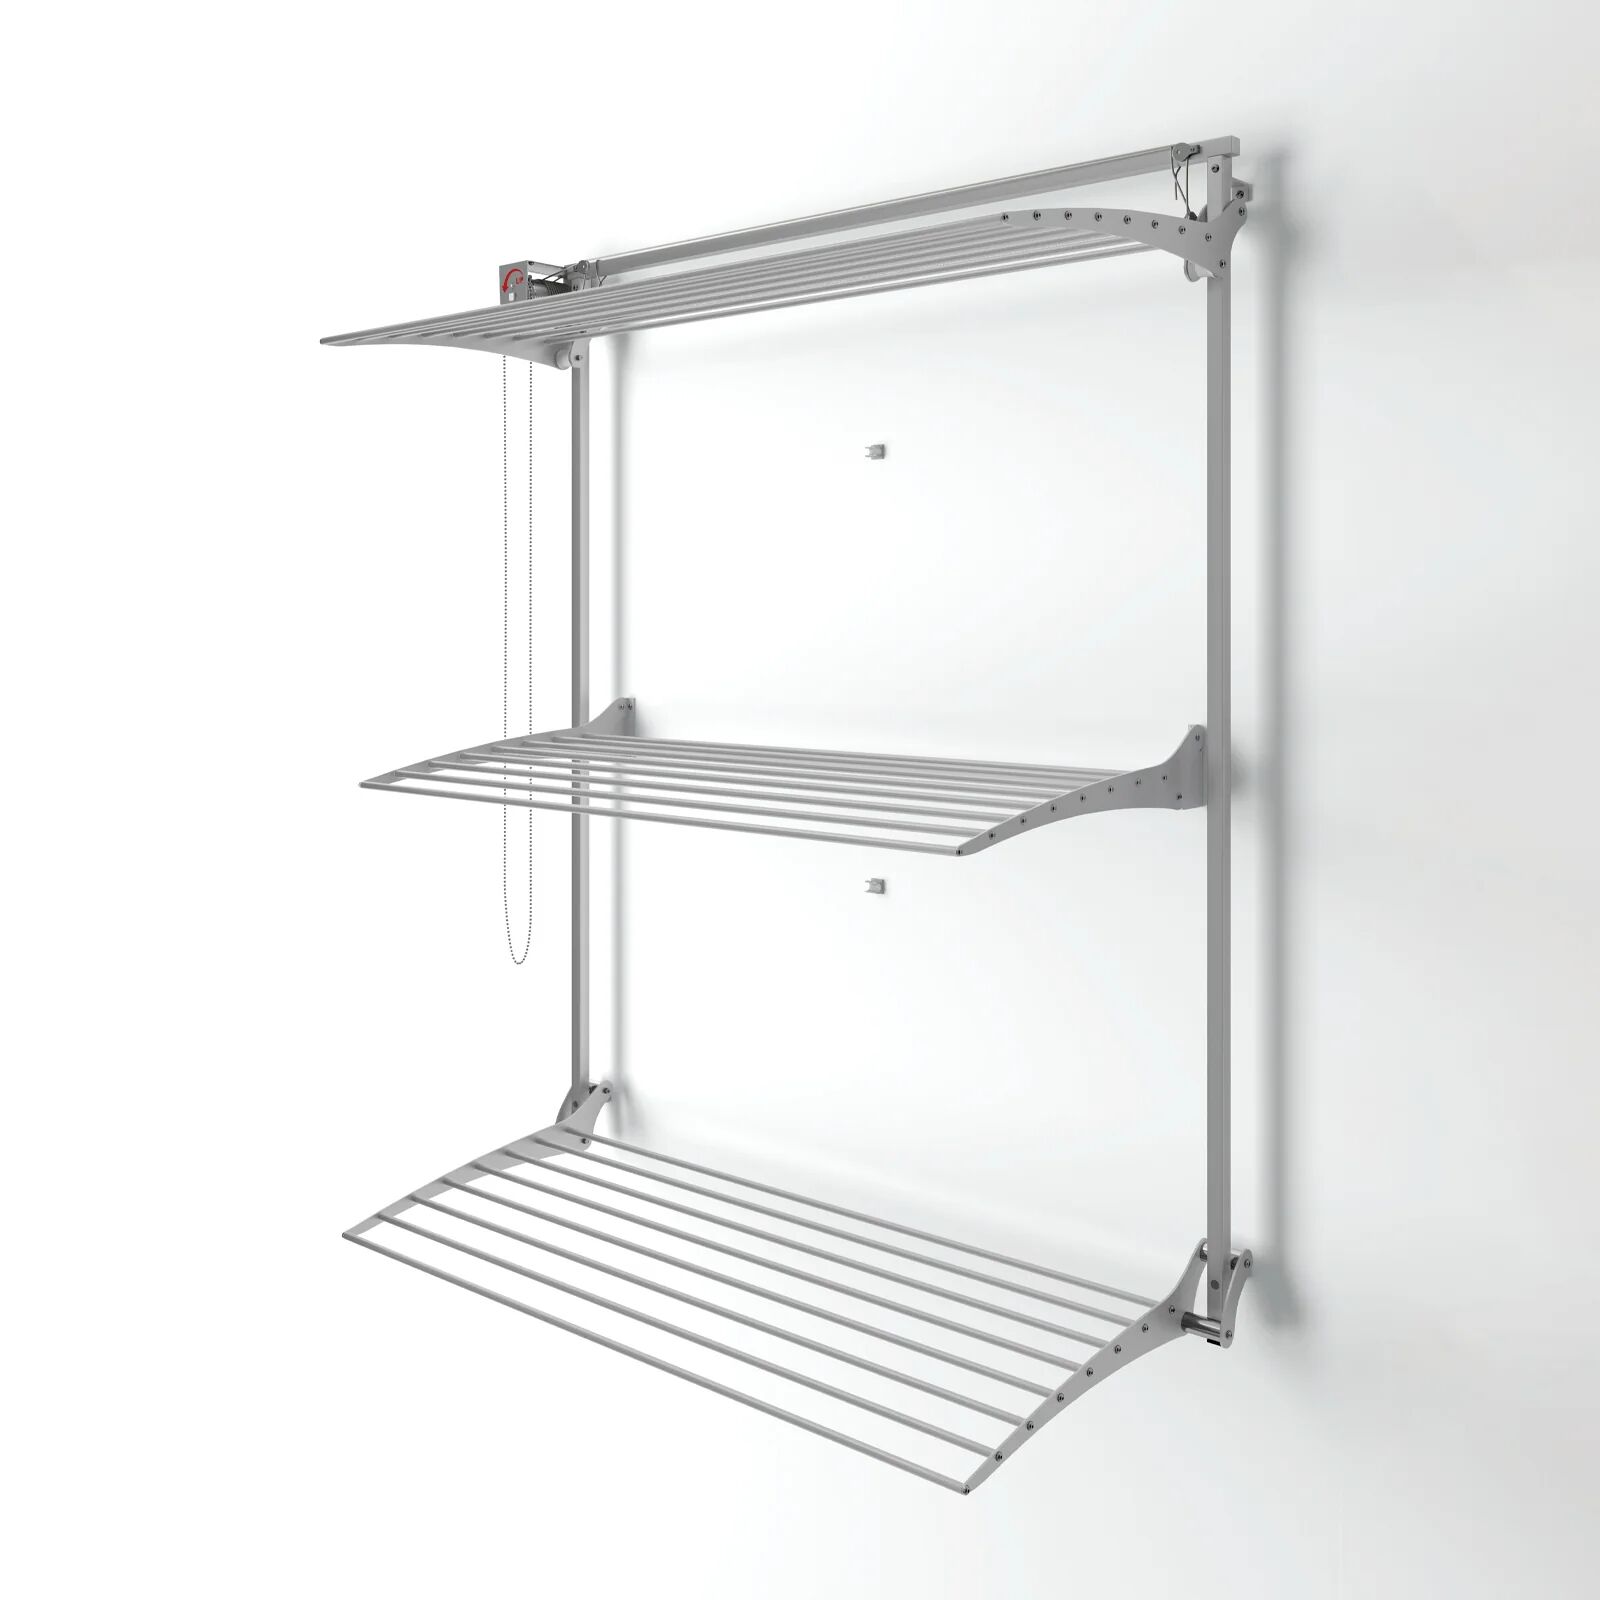 Foxydry Tower 150 tower clothes airer with foldable racks